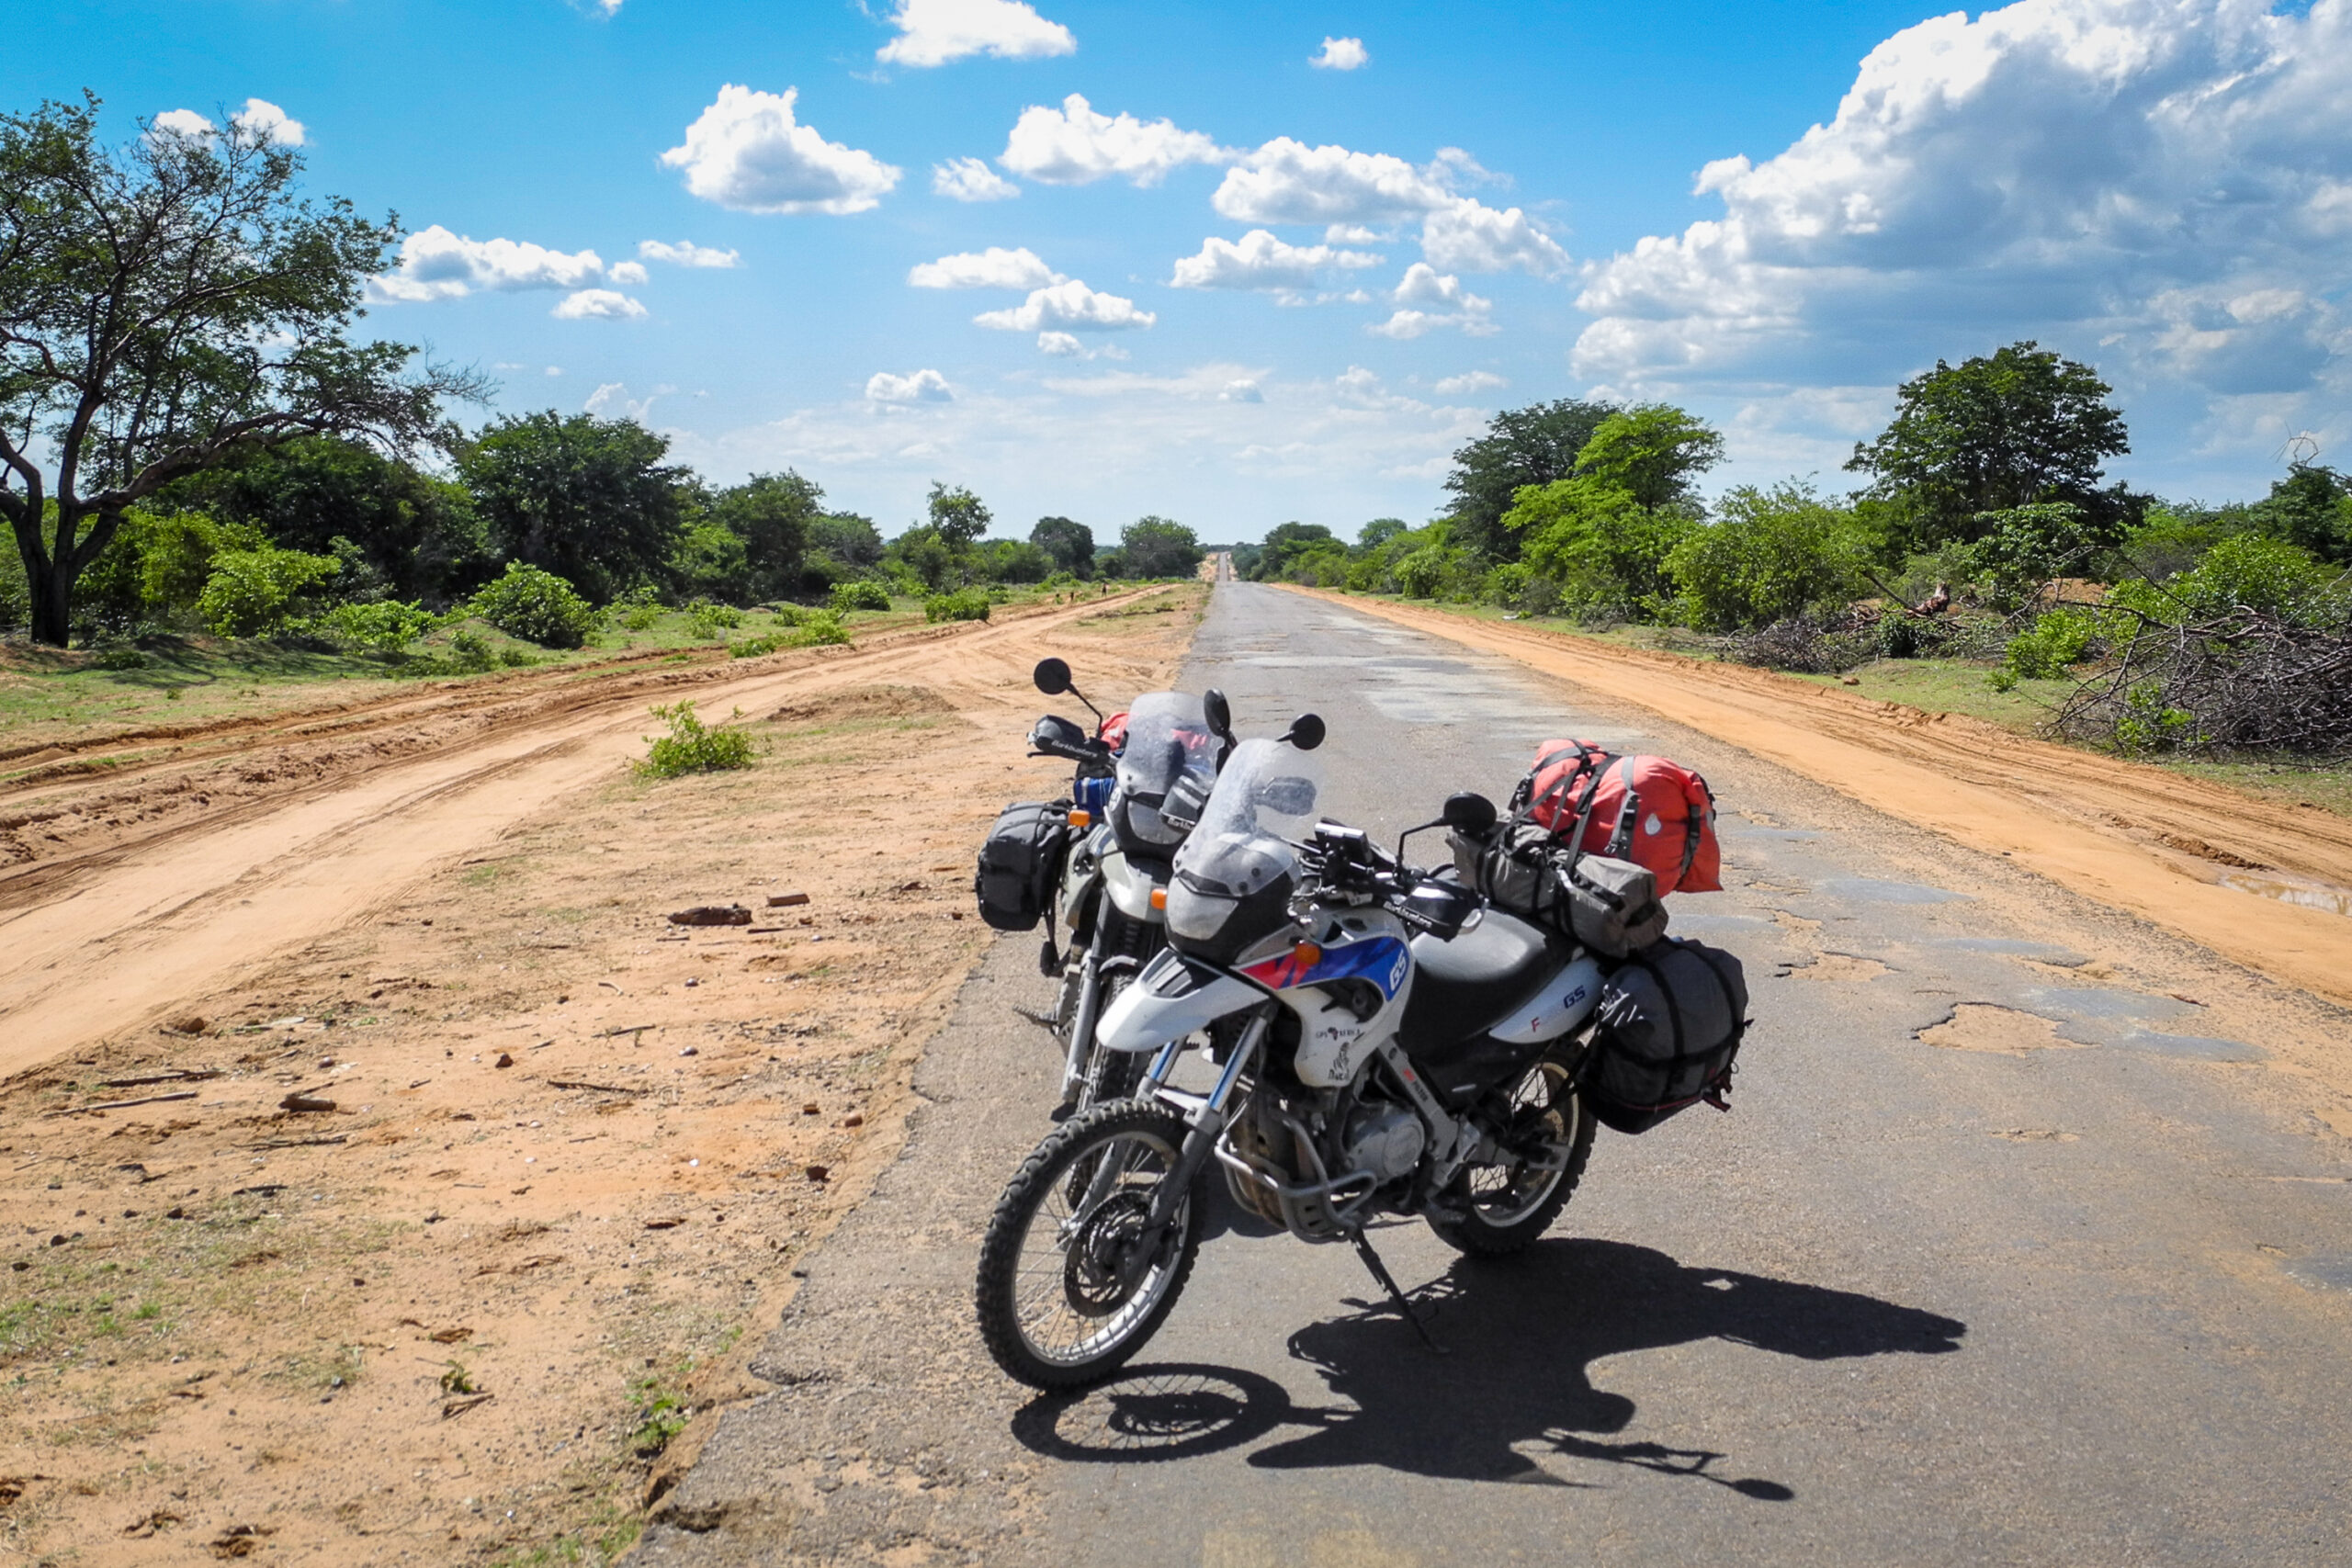 Pothole roads in Angola. It will kill any motorcycle wheels and suspension in quick time. Moto enduro stuff